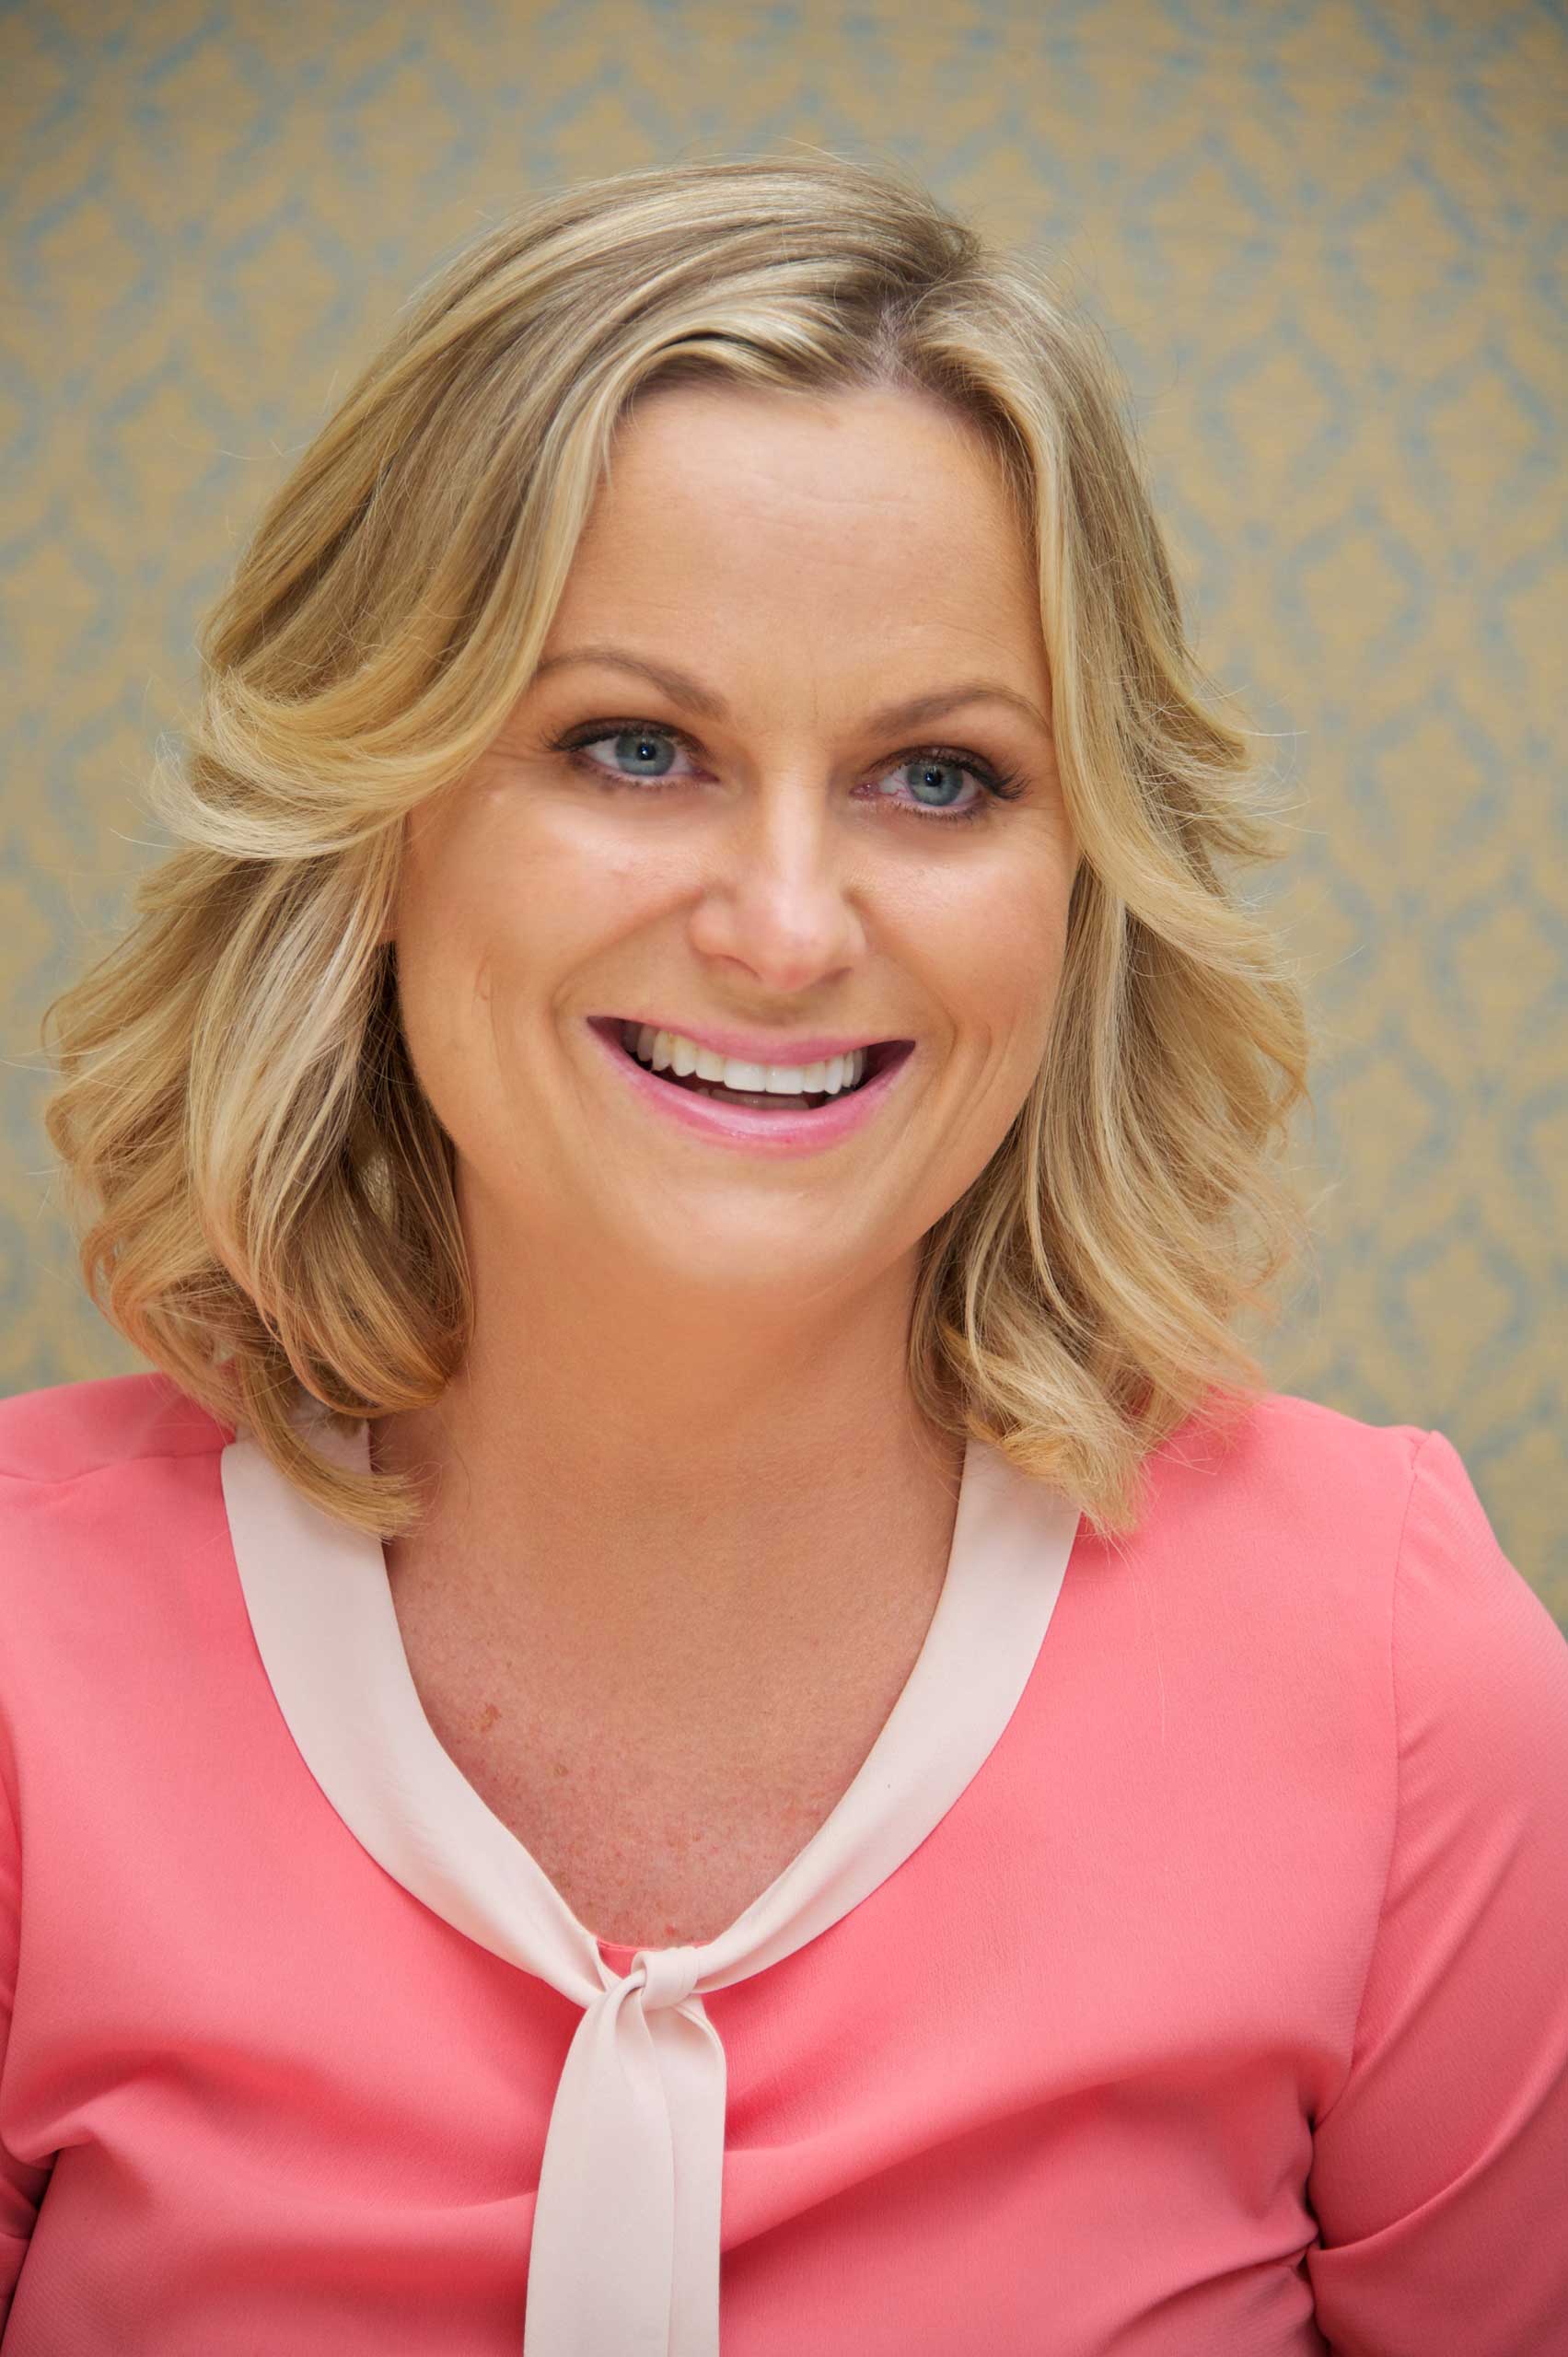 BEVERLY HILLS, CA - OCTOBER 15: Amy Poehler at the "Parks &amp; Recreation" Press Conference at the Four Seasons Hotel on October 15, 2013 in Beverly Hills, California. (Photo by Vera Anderson/WireImage)